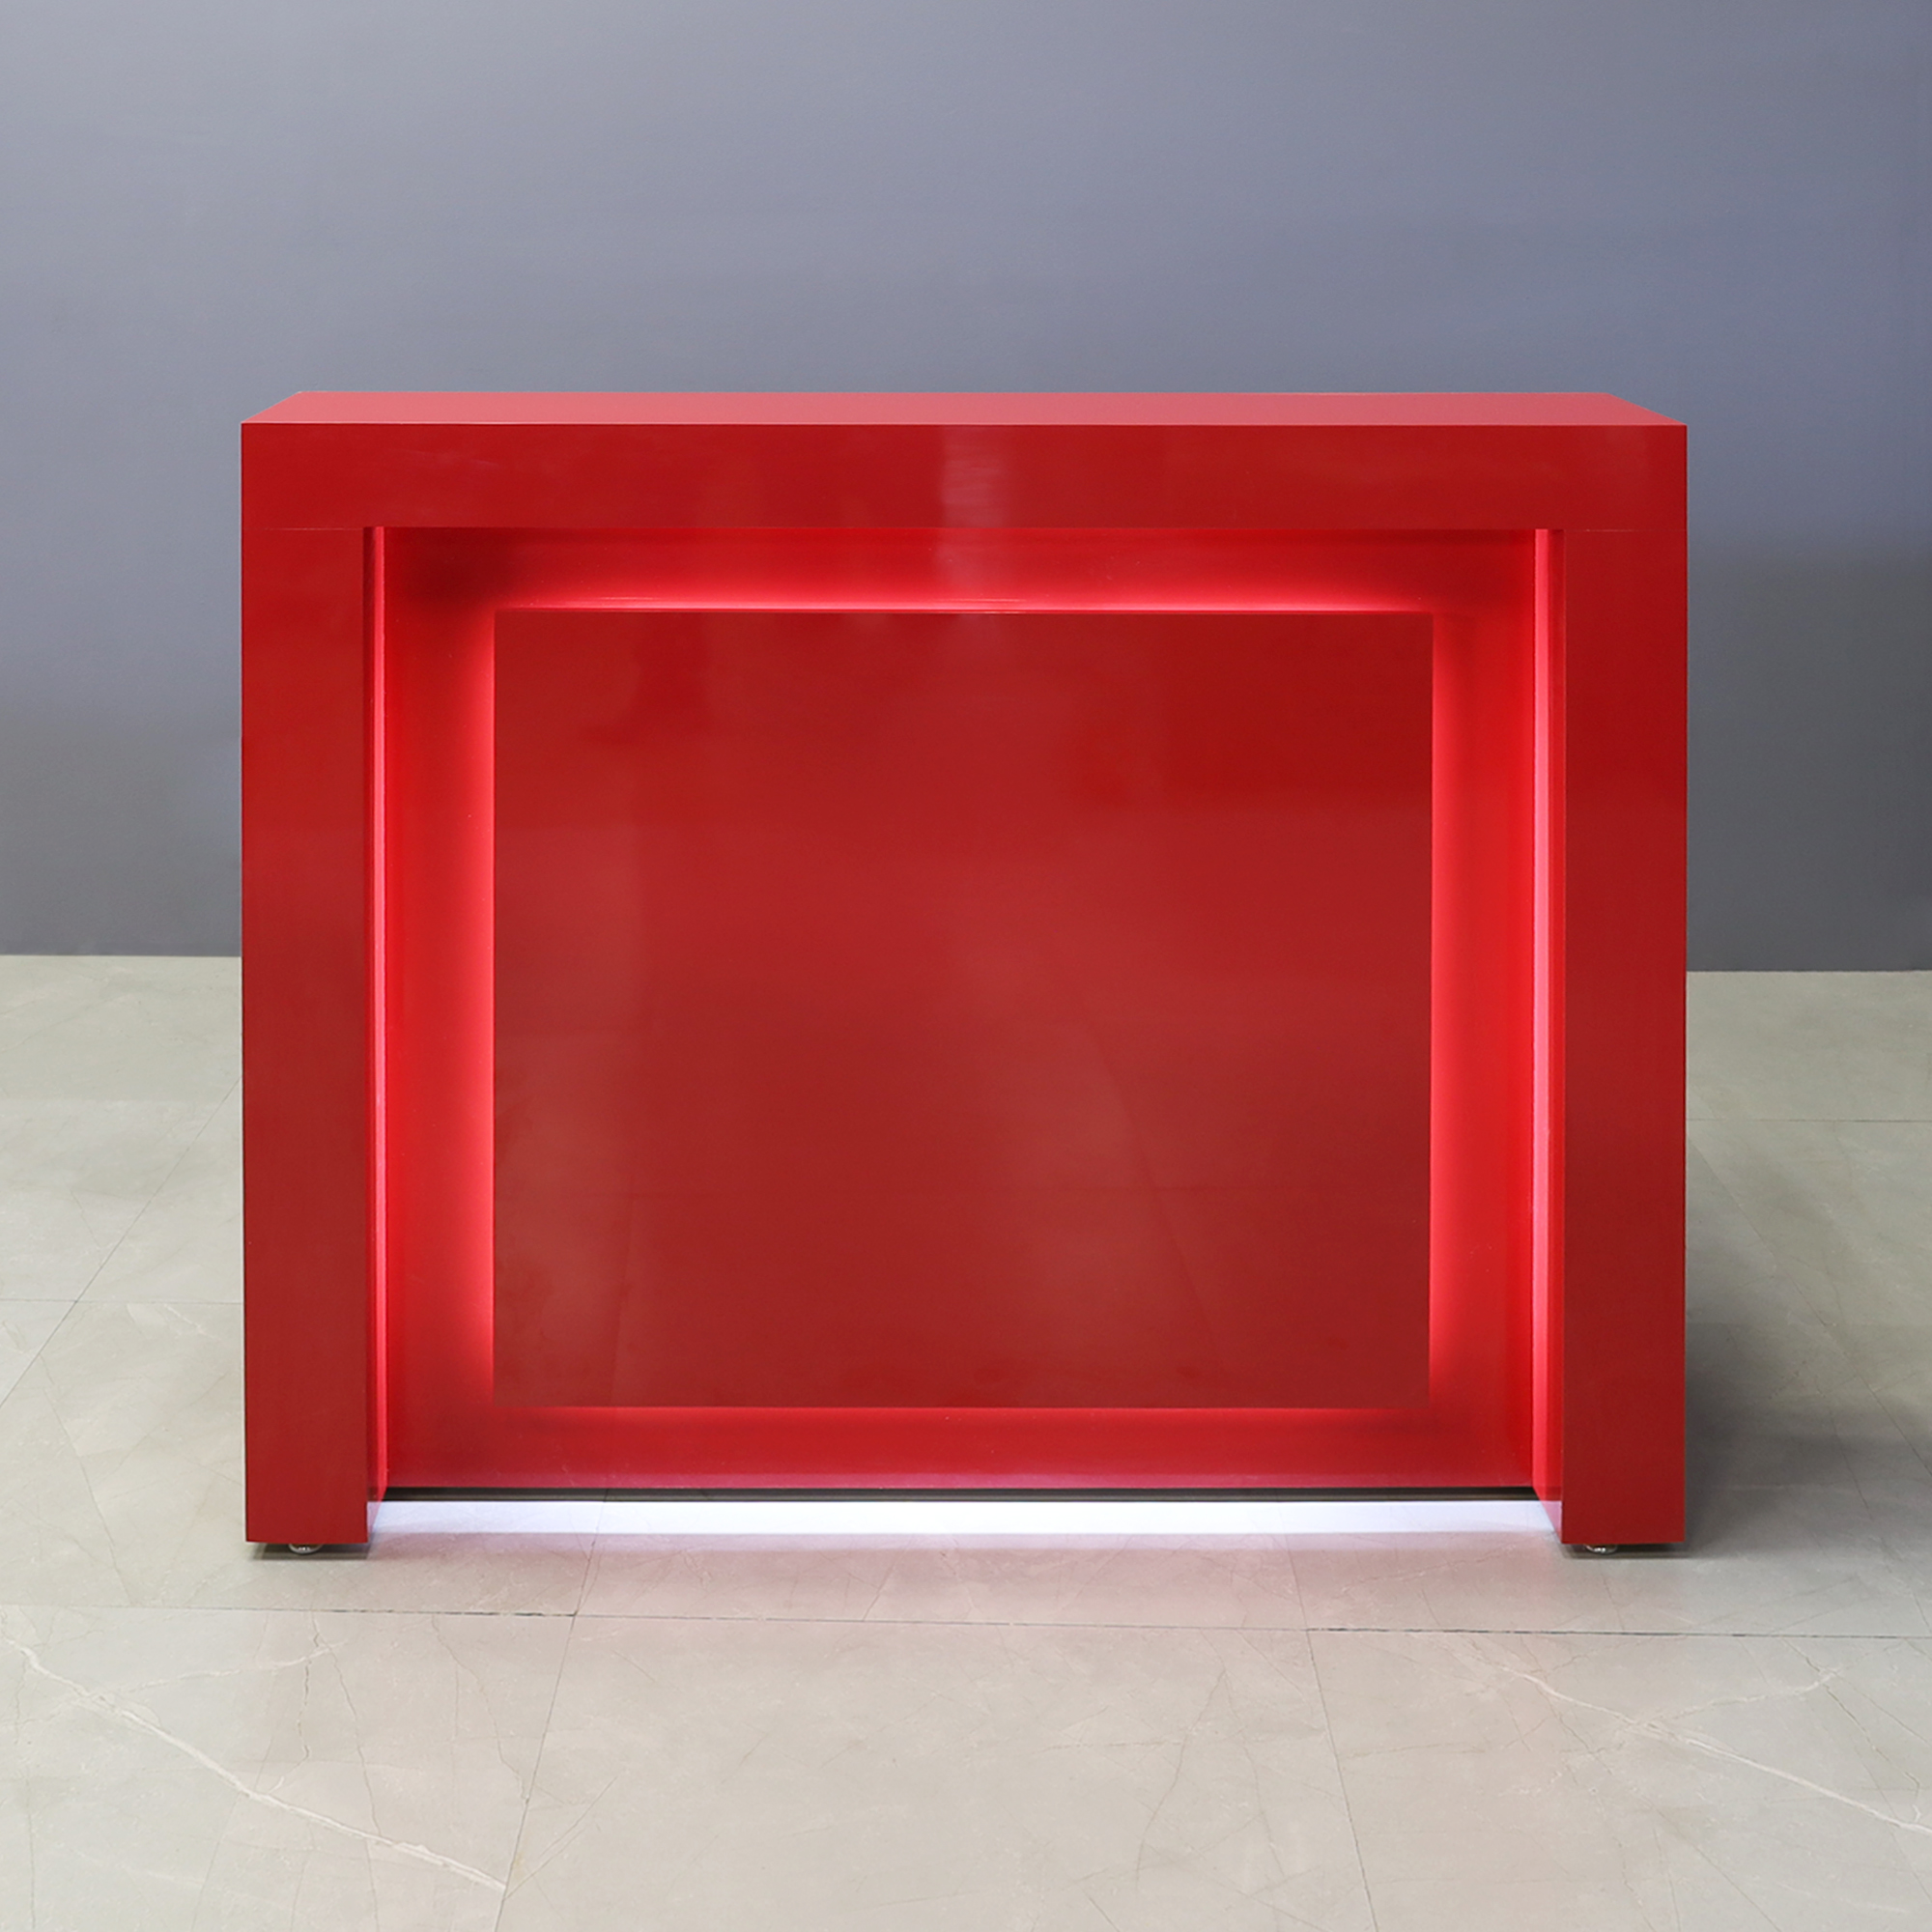 48-inch New York Straight Reception Desk in classic red gloss laminate main desk and accent, with warm white LED, shown here.